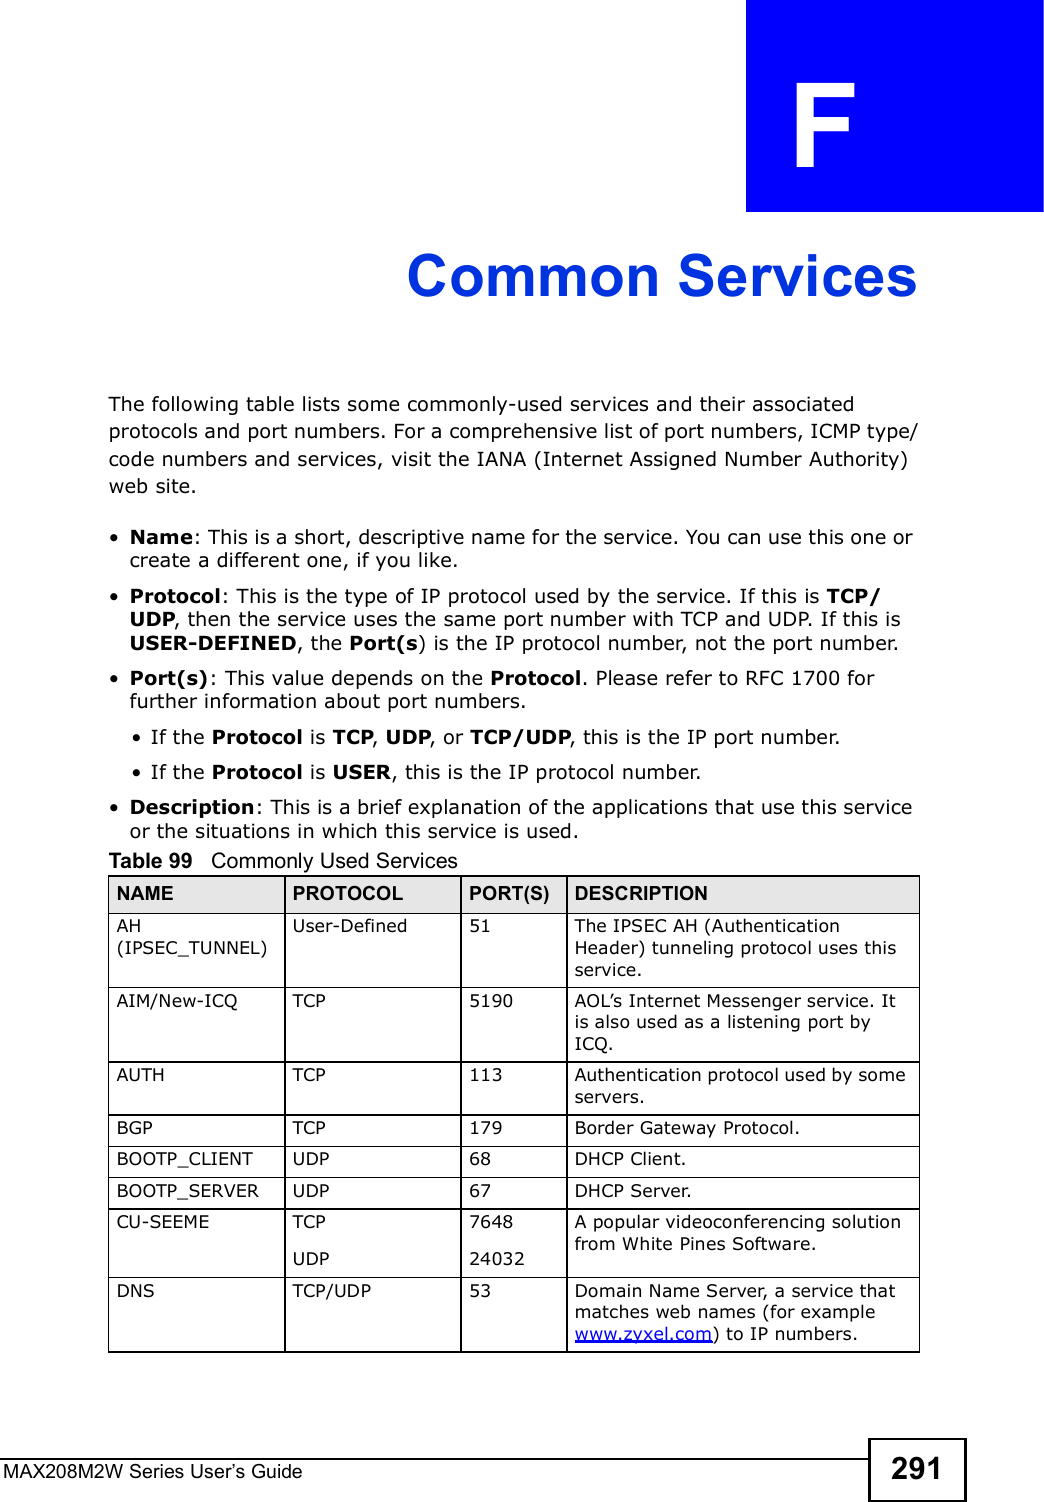 MAX208M2W Series User s Guide 291APPENDIX  F Common ServicesThe following table lists some commonly-used services and their associated protocols and port numbers. For a comprehensive list of port numbers, ICMP type/code numbers and services, visit the IANA (Internet Assigned Number Authority) web site. !Name: This is a short, descriptive name for the service. You can use this one or create a different one, if you like.!Protocol: This is the type of IP protocol used by the service. If this is TCP/UDP, then the service uses the same port number with TCP and UDP. If this is USER-DEFINED, the Port(s) is the IP protocol number, not the port number.!Port(s): This value depends on the Protocol. Please refer to RFC 1700 for further information about port numbers.!If the Protocol is TCP, UDP, or TCP/UDP, this is the IP port number.!If the Protocol is USER, this is the IP protocol number.!Description: This is a brief explanation of the applications that use this service or the situations in which this service is used.Table 99   Commonly Used ServicesNAME PROTOCOL PORT(S) DESCRIPTIONAH (IPSEC_TUNNEL)User-Defined 51 The IPSEC AH (Authentication Header) tunneling protocol uses this service.AIM/New-ICQ TCP 5190 AOL s Internet Messenger service. It is also used as a listening port by ICQ.AUTH TCP 113 Authentication protocol used by some servers.BGP TCP 179 Border Gateway Protocol.BOOTP_CLIENT UDP 68 DHCP Client.BOOTP_SERVER UDP 67 DHCP Server.CU-SEEME TCPUDP764824032A popular videoconferencing solution from White Pines Software.DNS TCP/UDP 53 Domain Name Server, a service that matches web names (for example www.zyxel.com) to IP numbers.